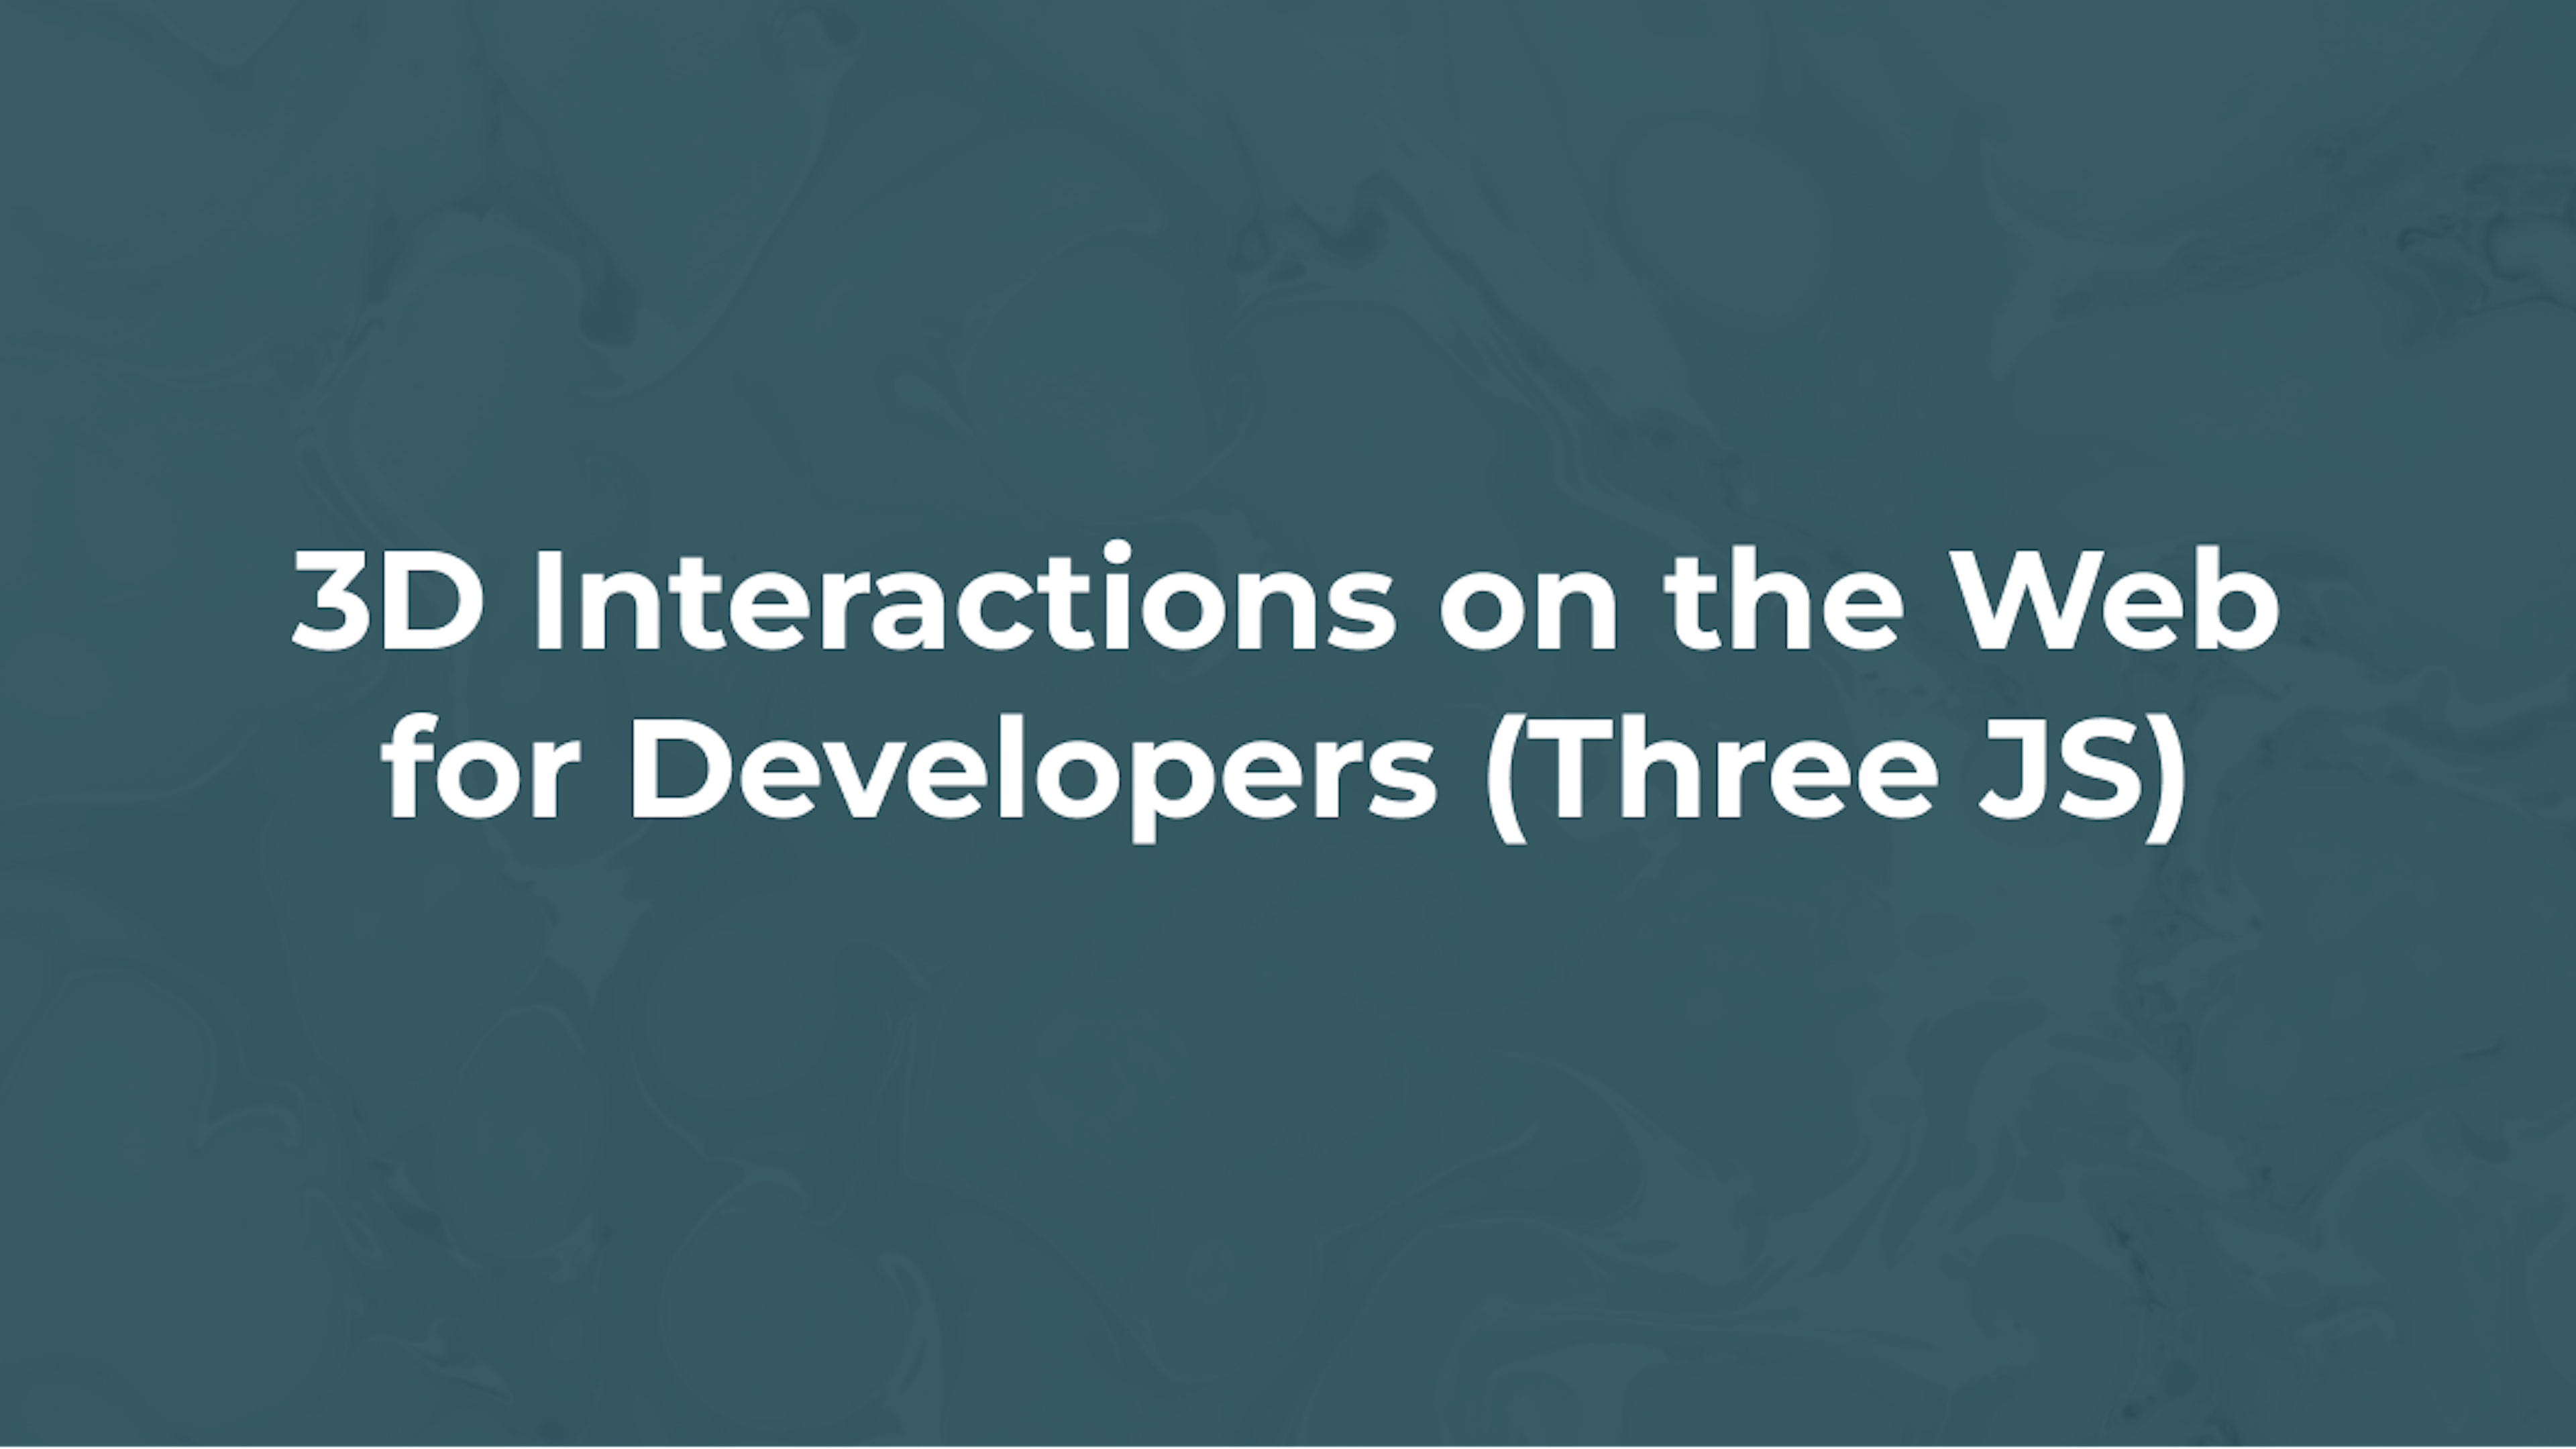 3D Interactions on the Web for Developers (Three JS)